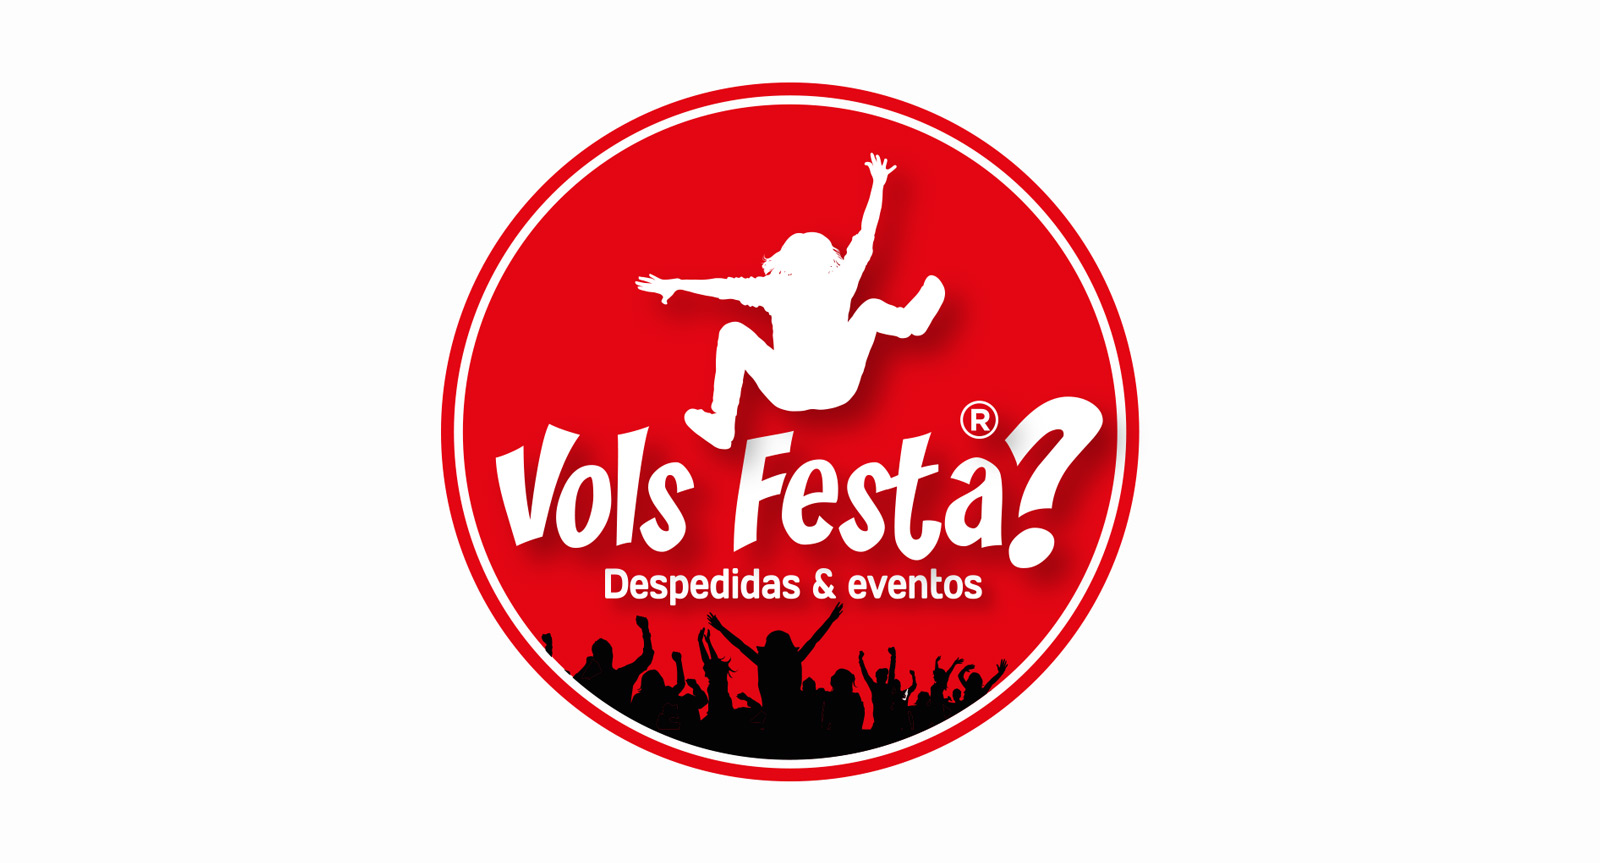 Graphic and creative design of logo and branding for brand of nightclubs, parties and events Volsfesta